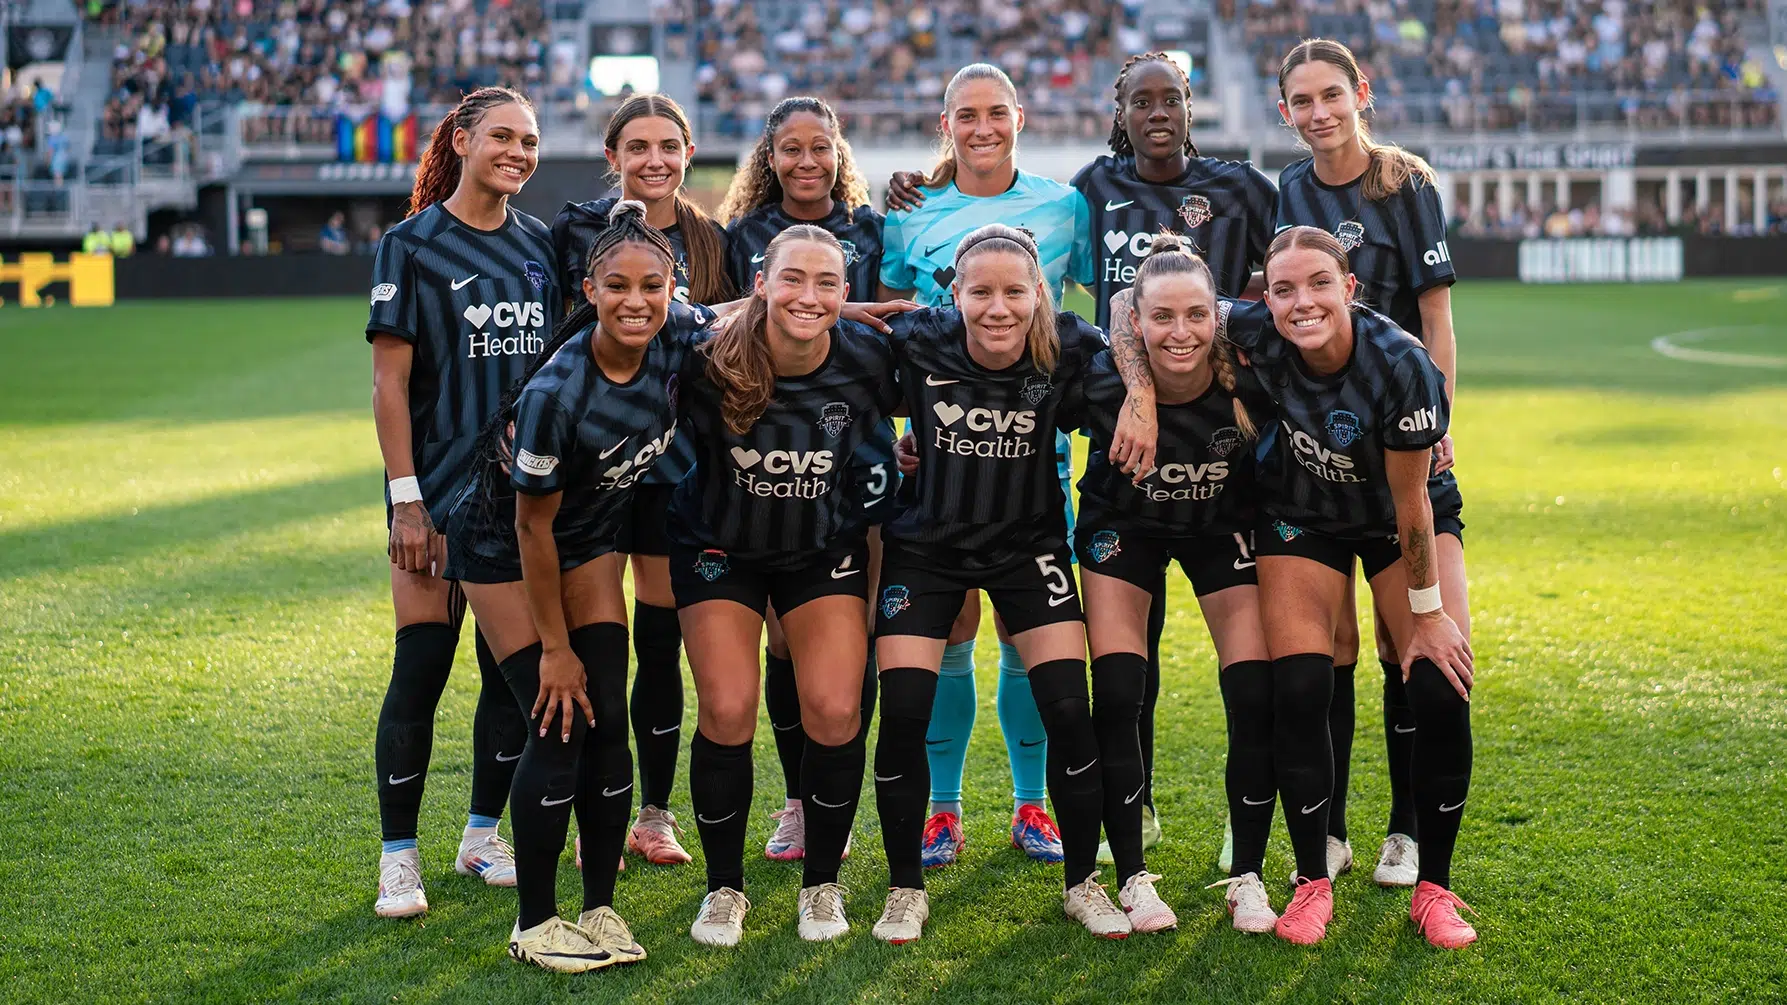 The starting eleven for the Spirit in two rows wearing black jerseys.